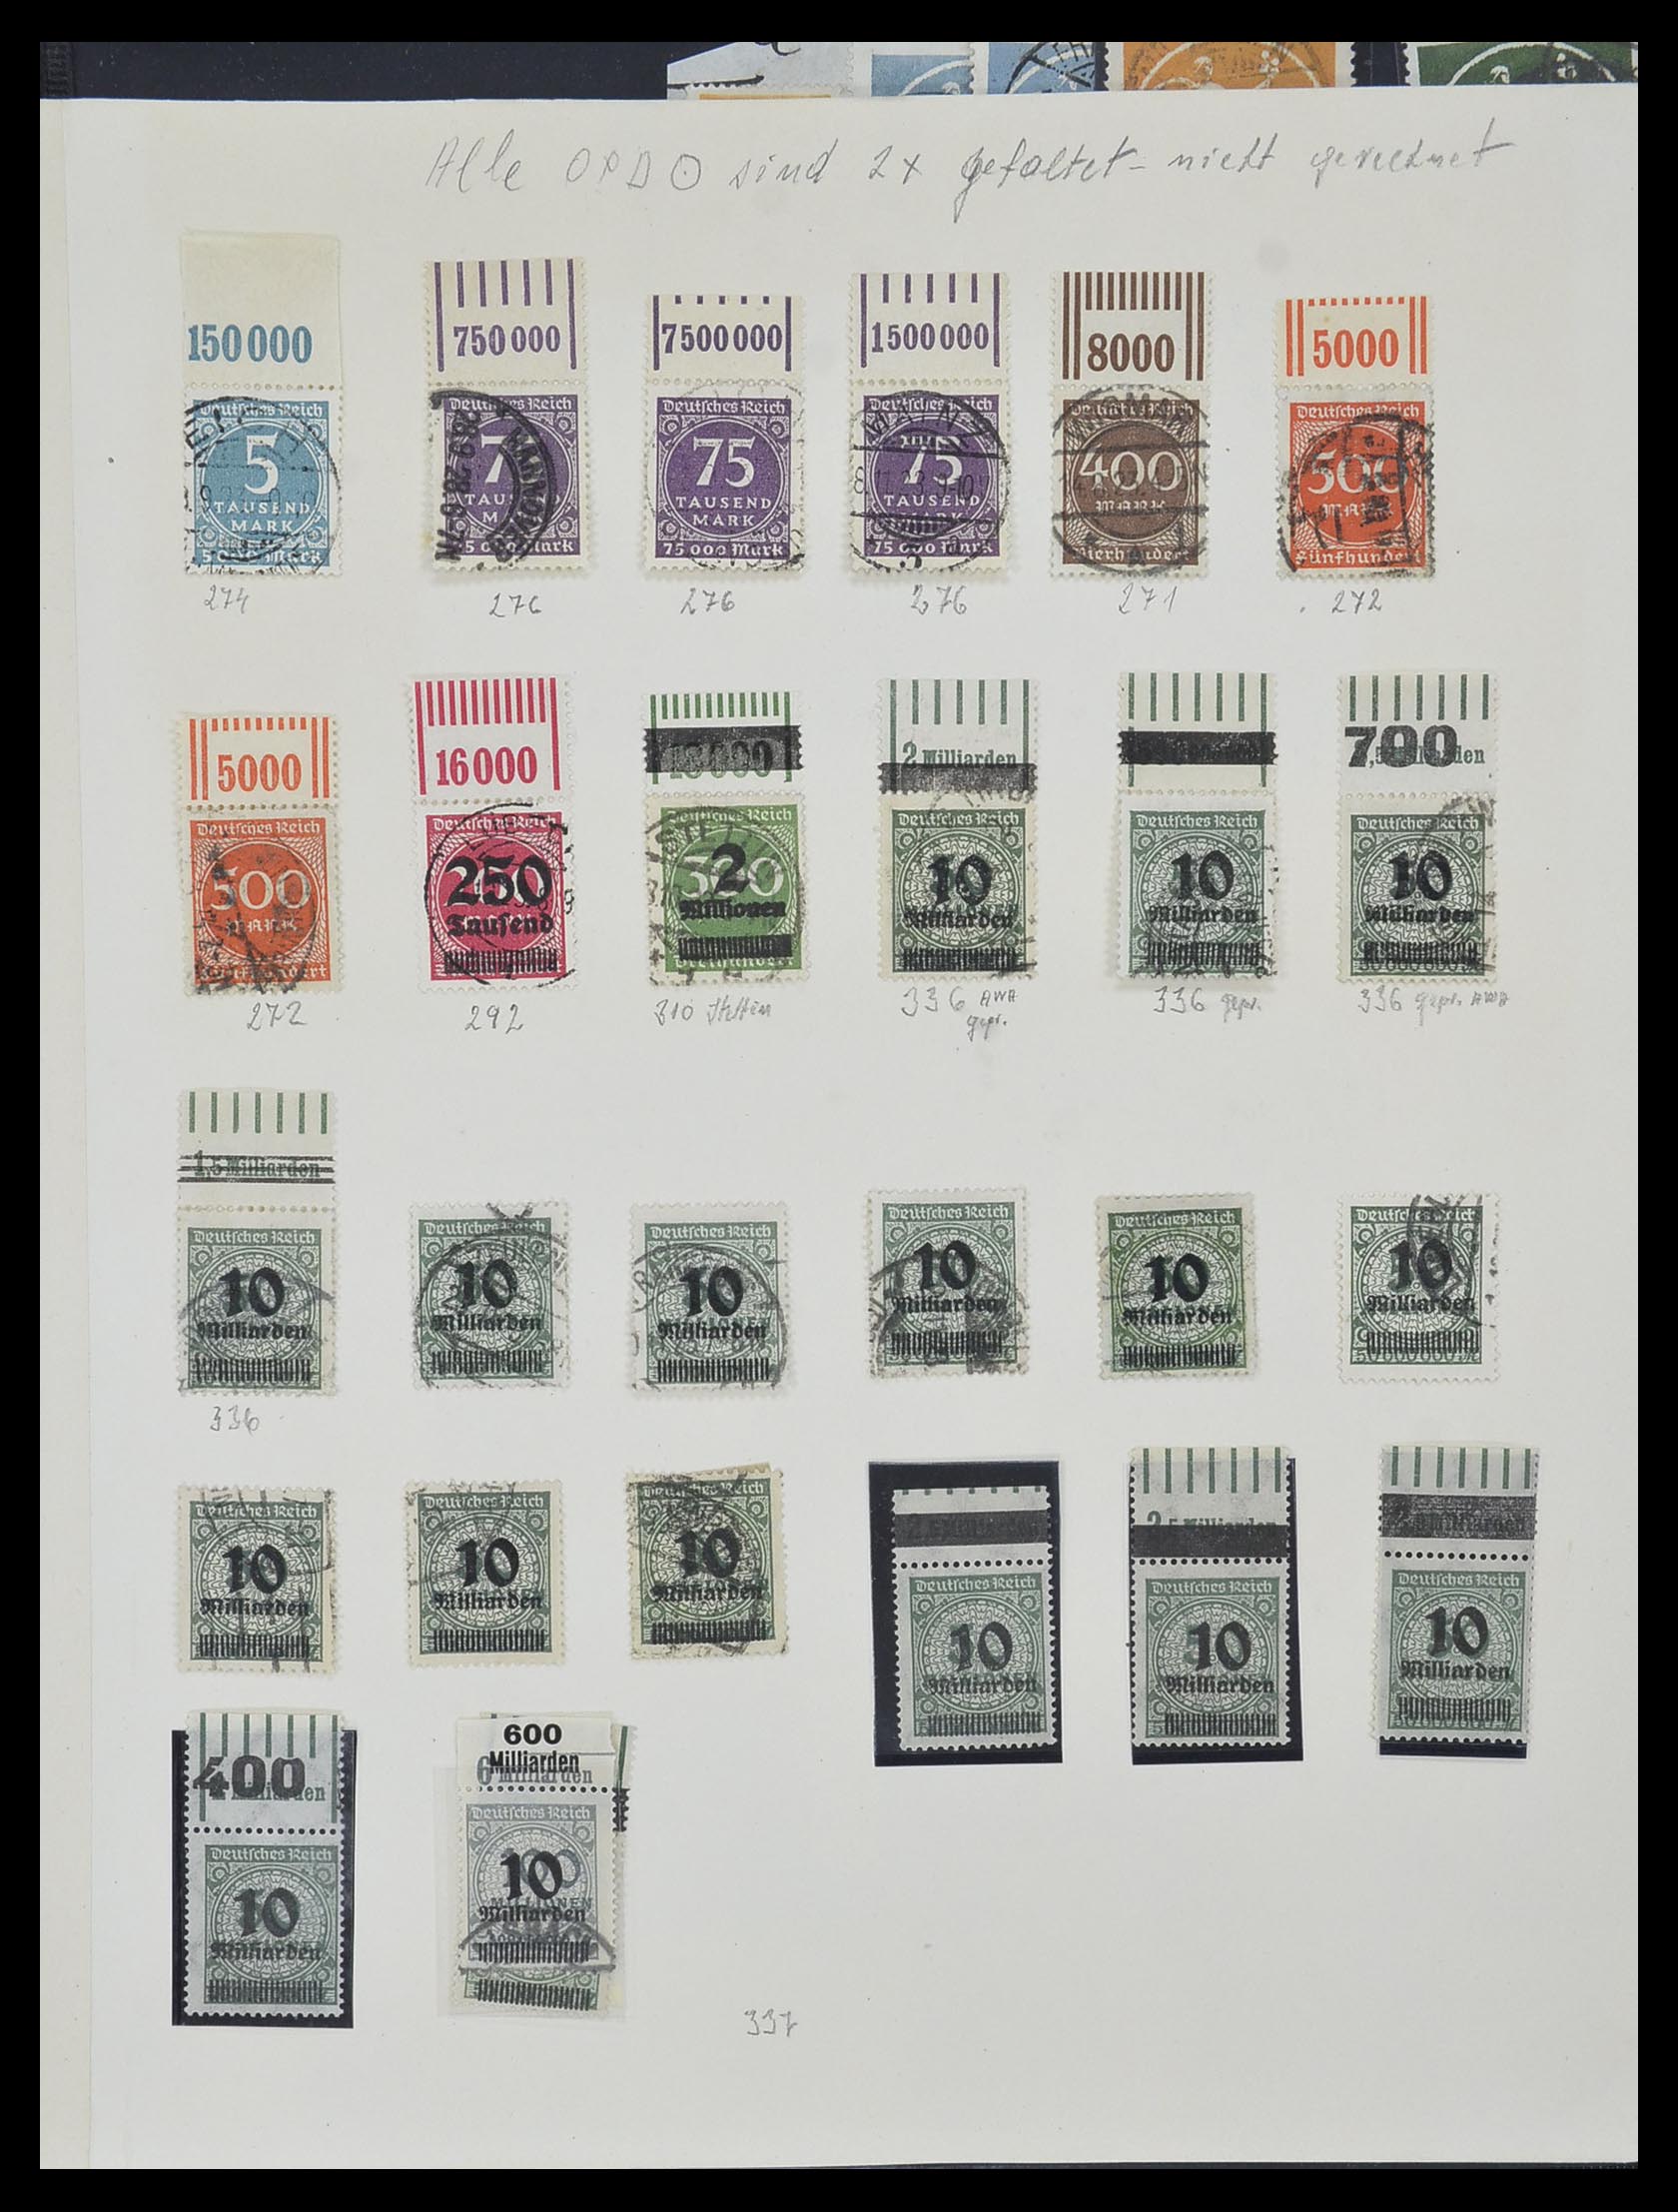 33957 030 - Stamp collection 33957 German Reich infla 1923.